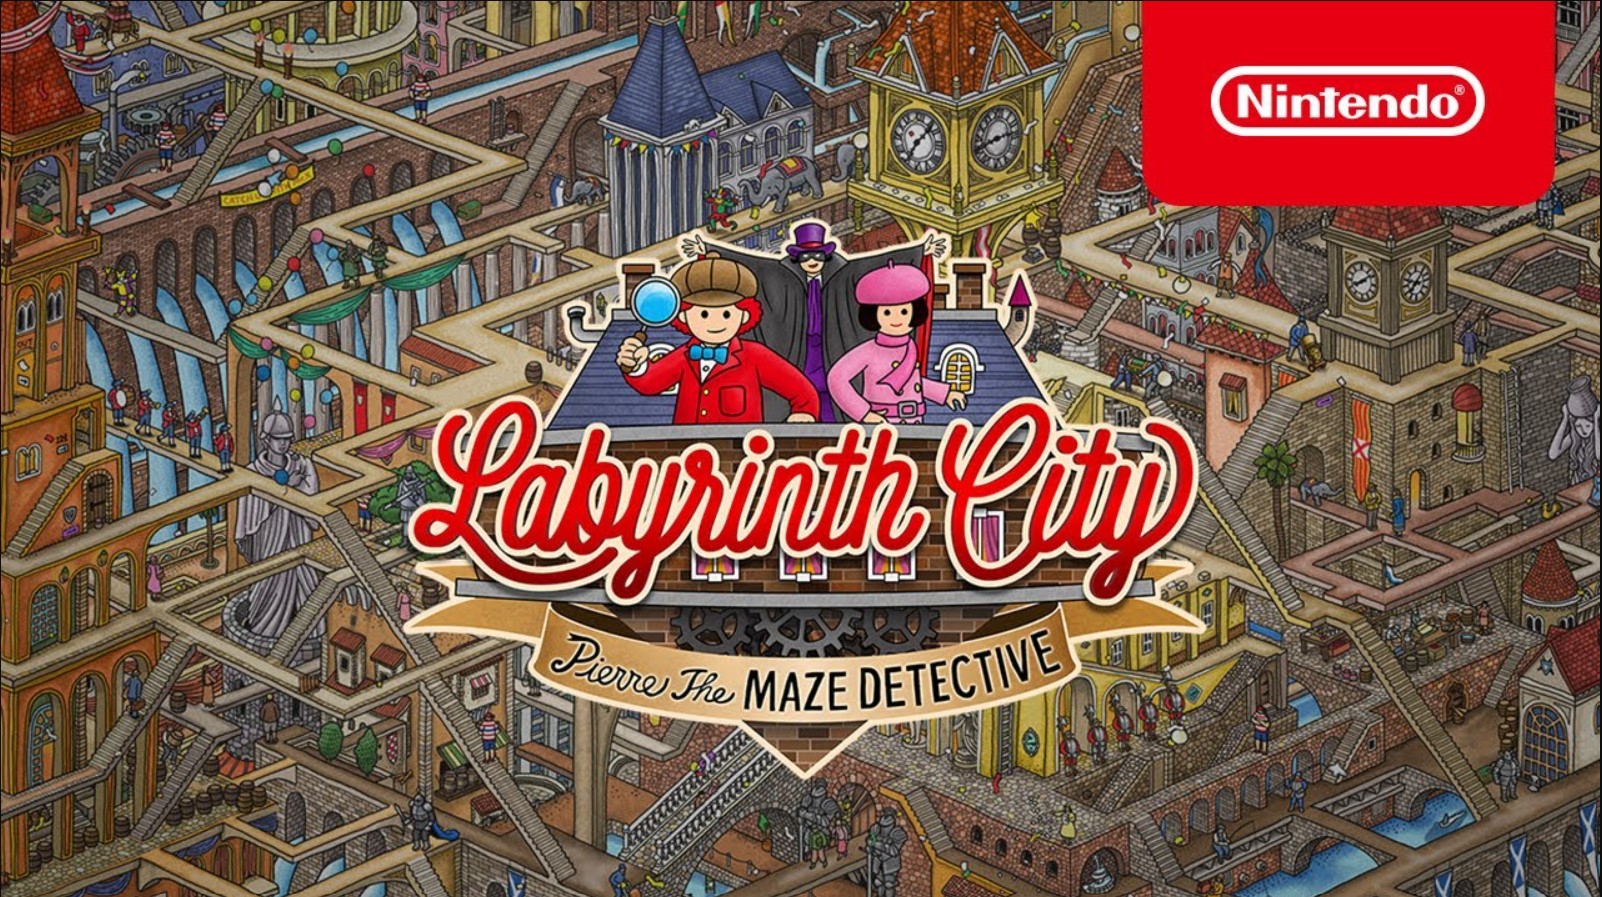 Labyrinth City Pierre the Maze Detective PC Version Full Game Free Download